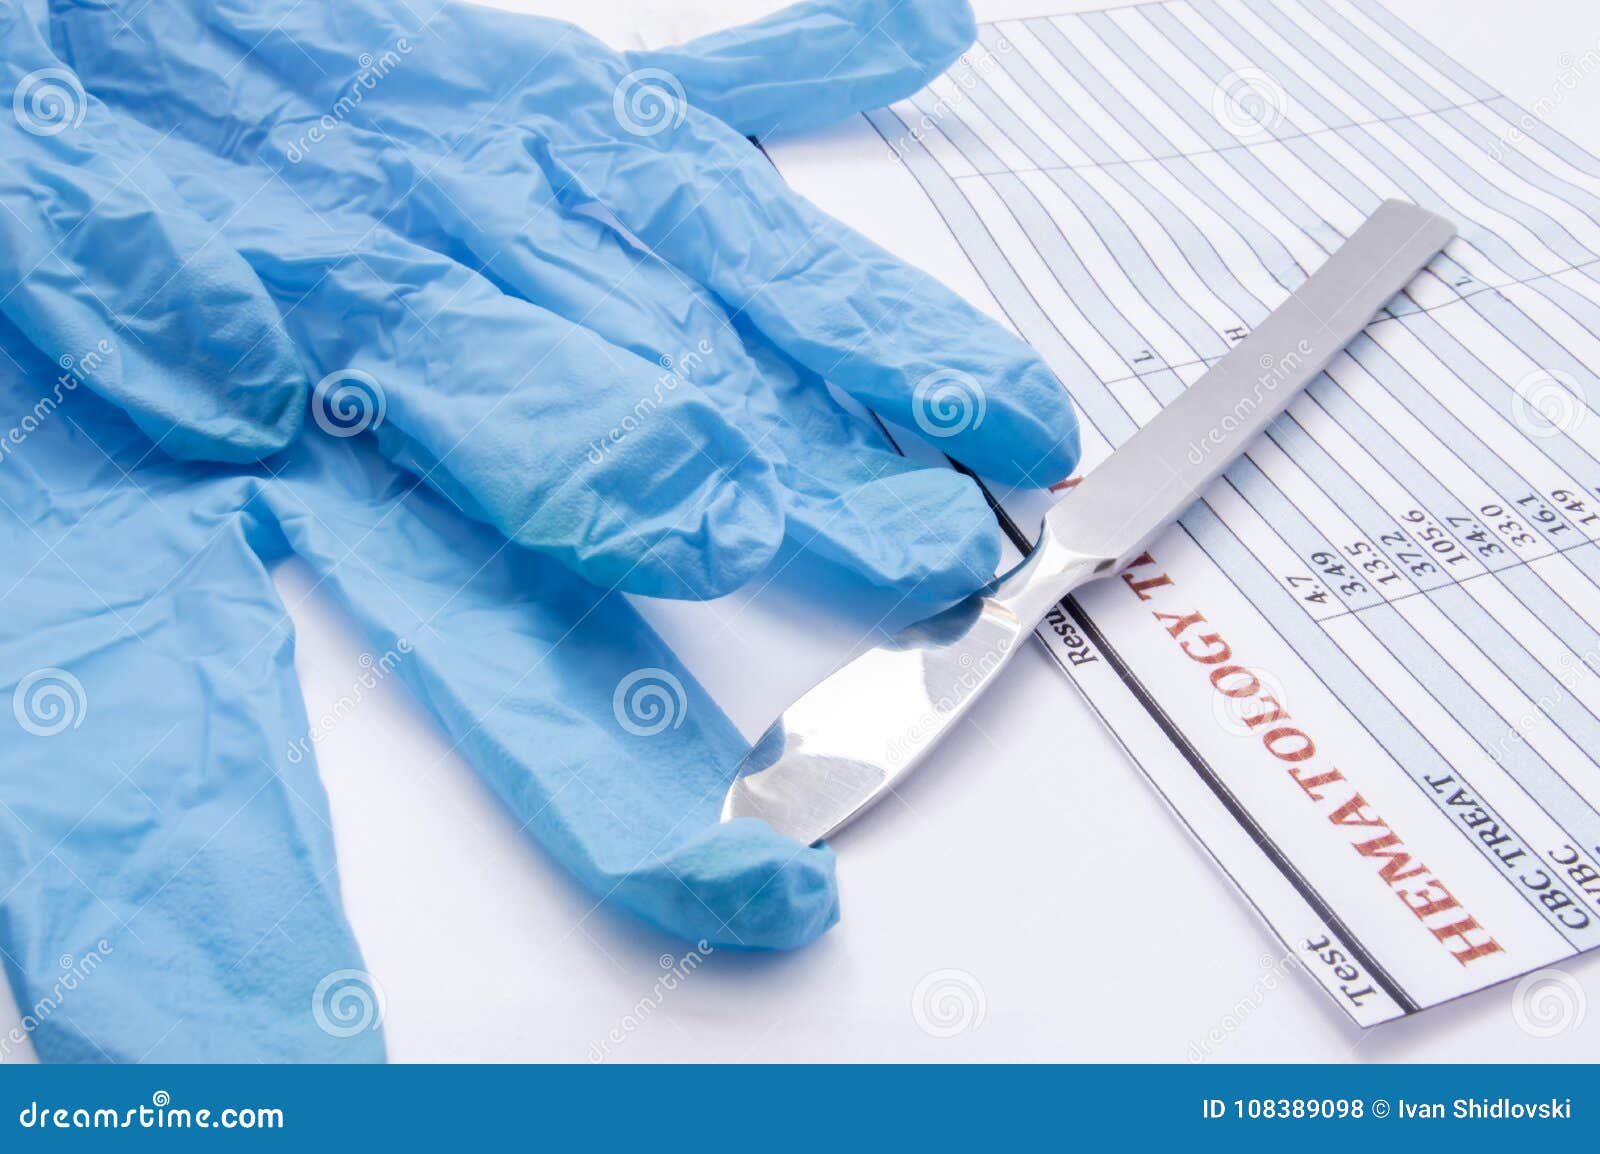 surgical gloves, scalpel and hematology blood test result on operating table. preparation for surgery or its completion. physician